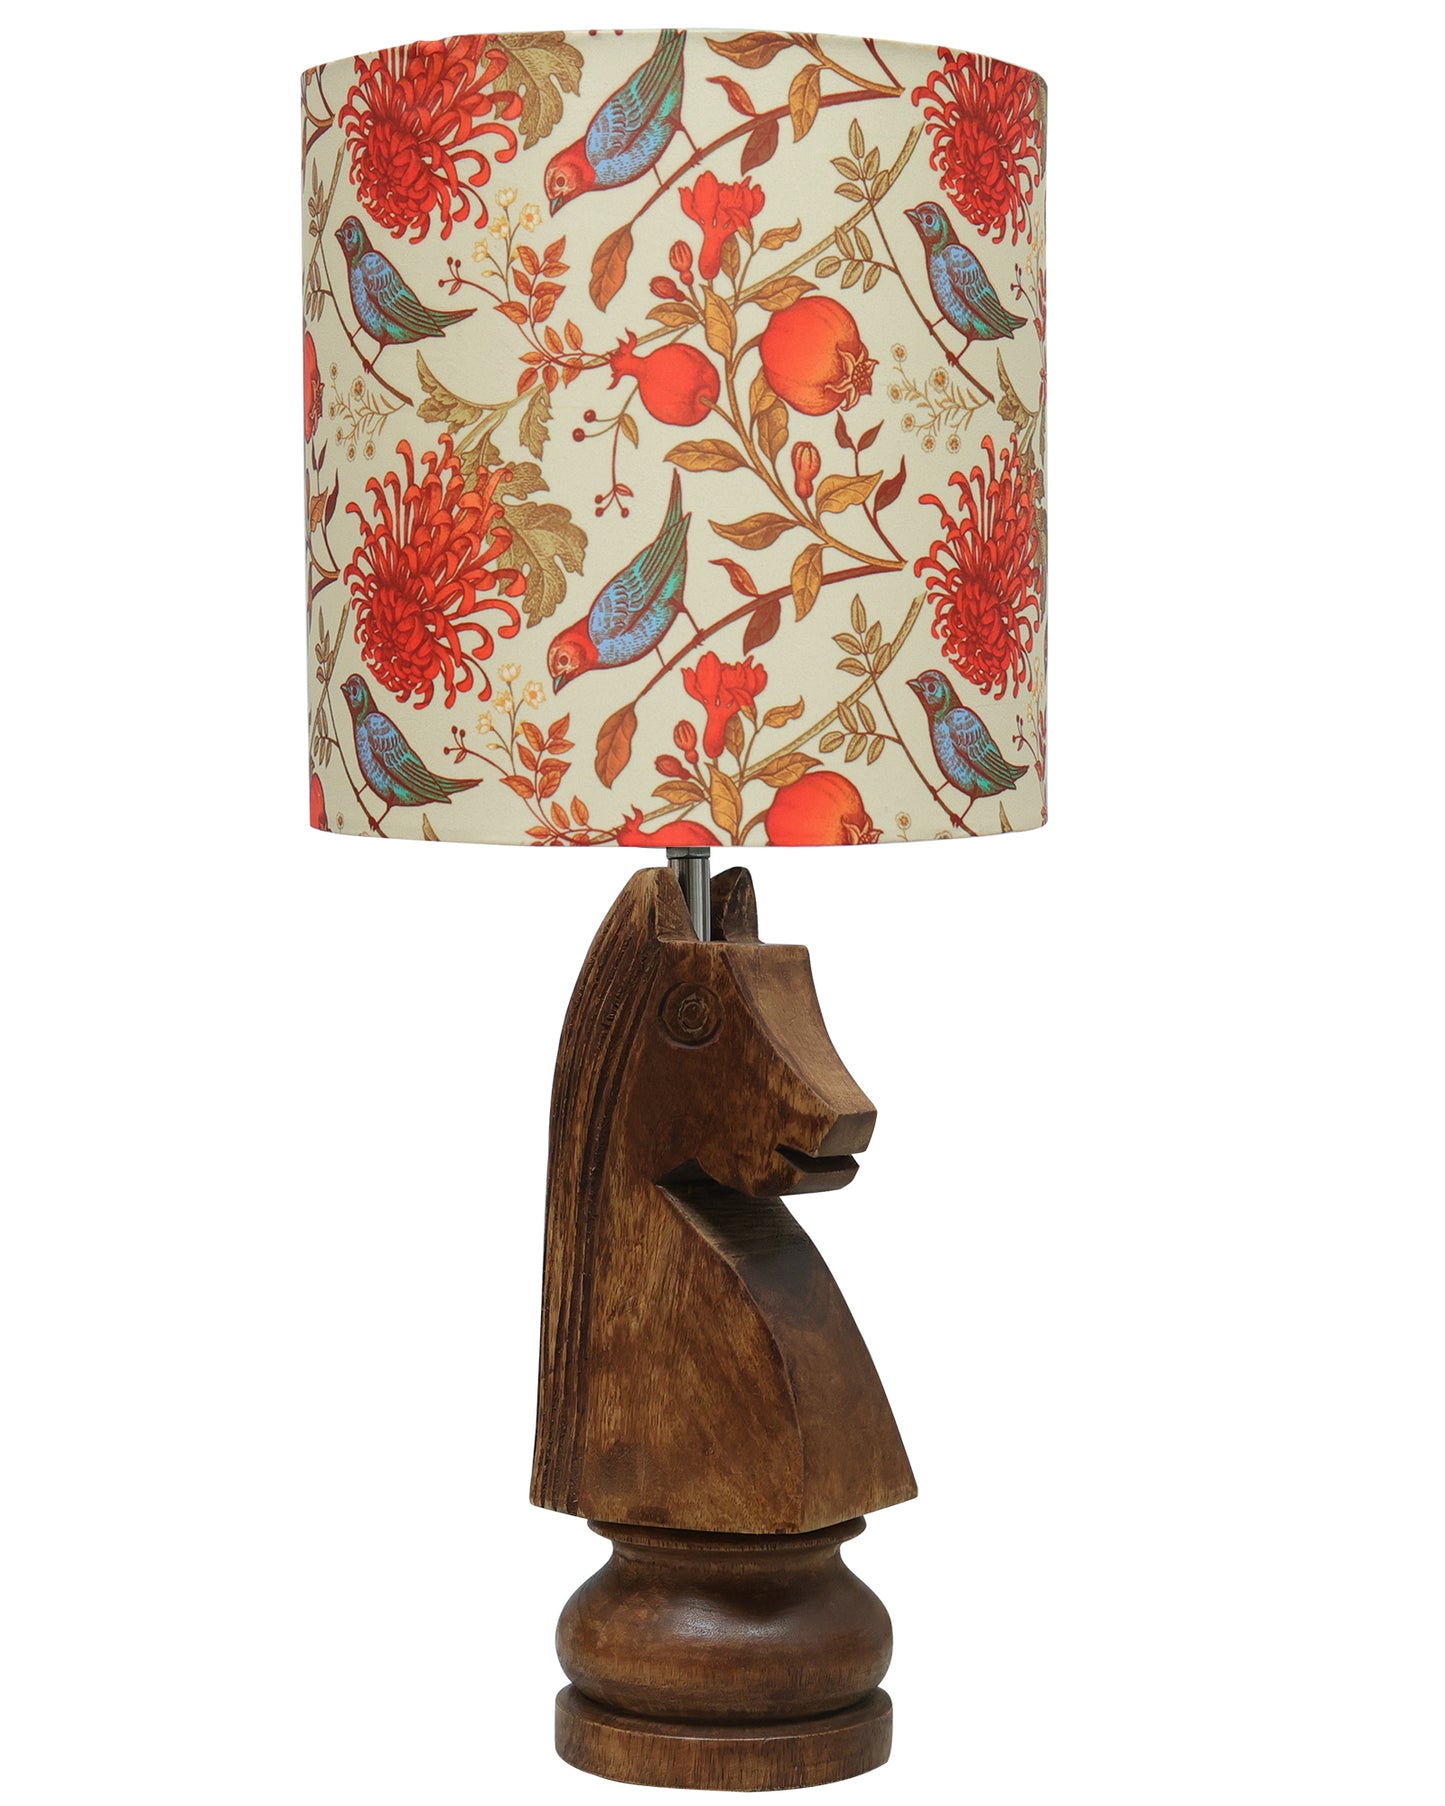 Chess Bedside Table Desk Lamp Rustic Wood Base Fabric Shade for Décor, Accent Light, Gameroom, Kids', Living Room, Bedroom, Office, Resturant